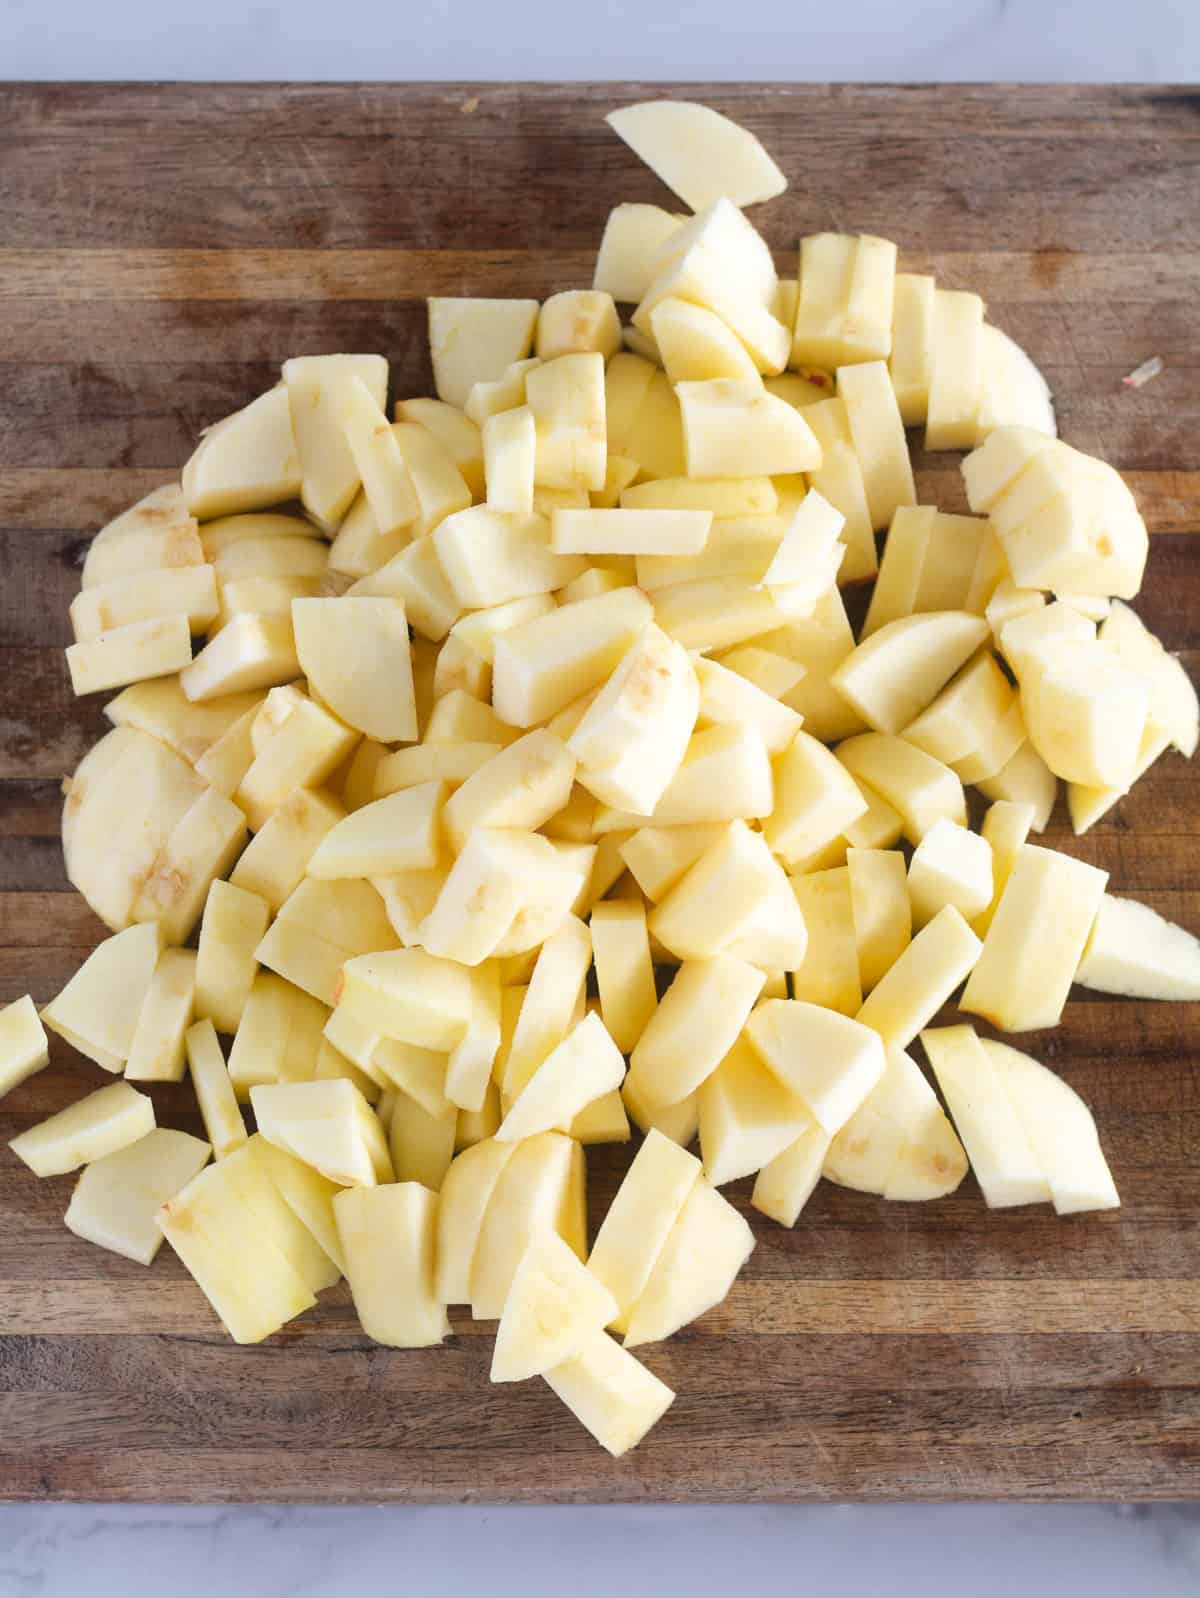 peeled and chopped apples on a wooden cutting board